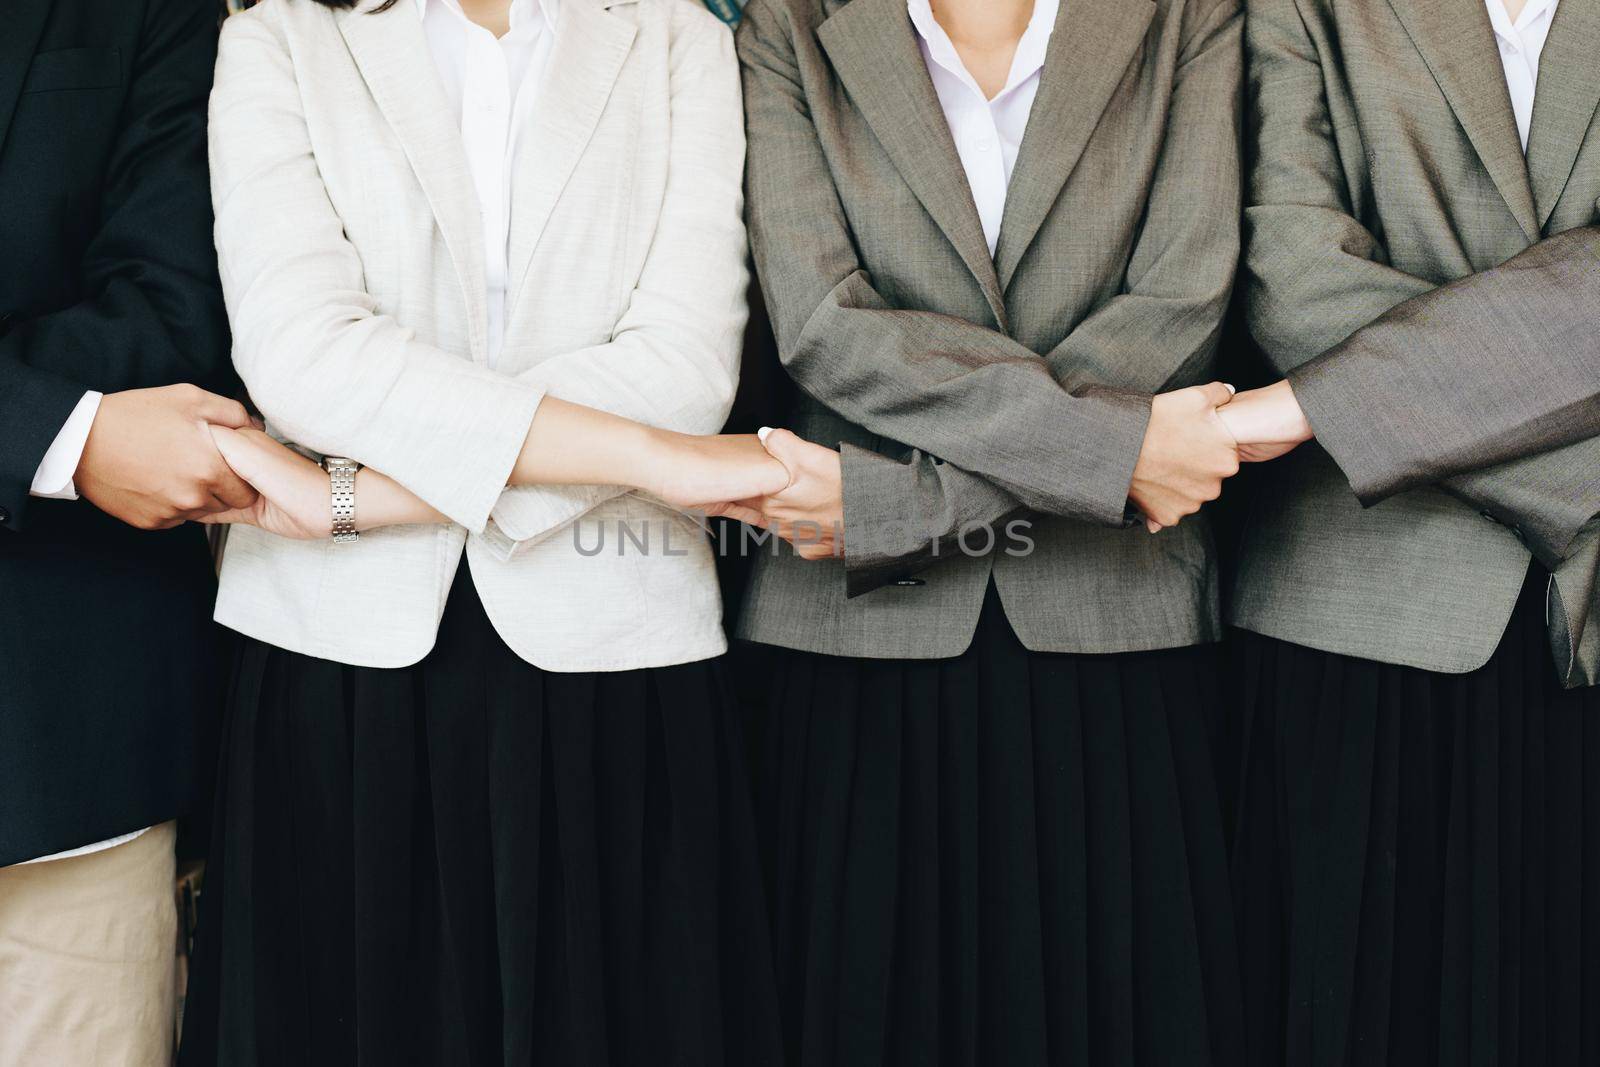 Group of business people showing merger symbol, together concept by Manastrong